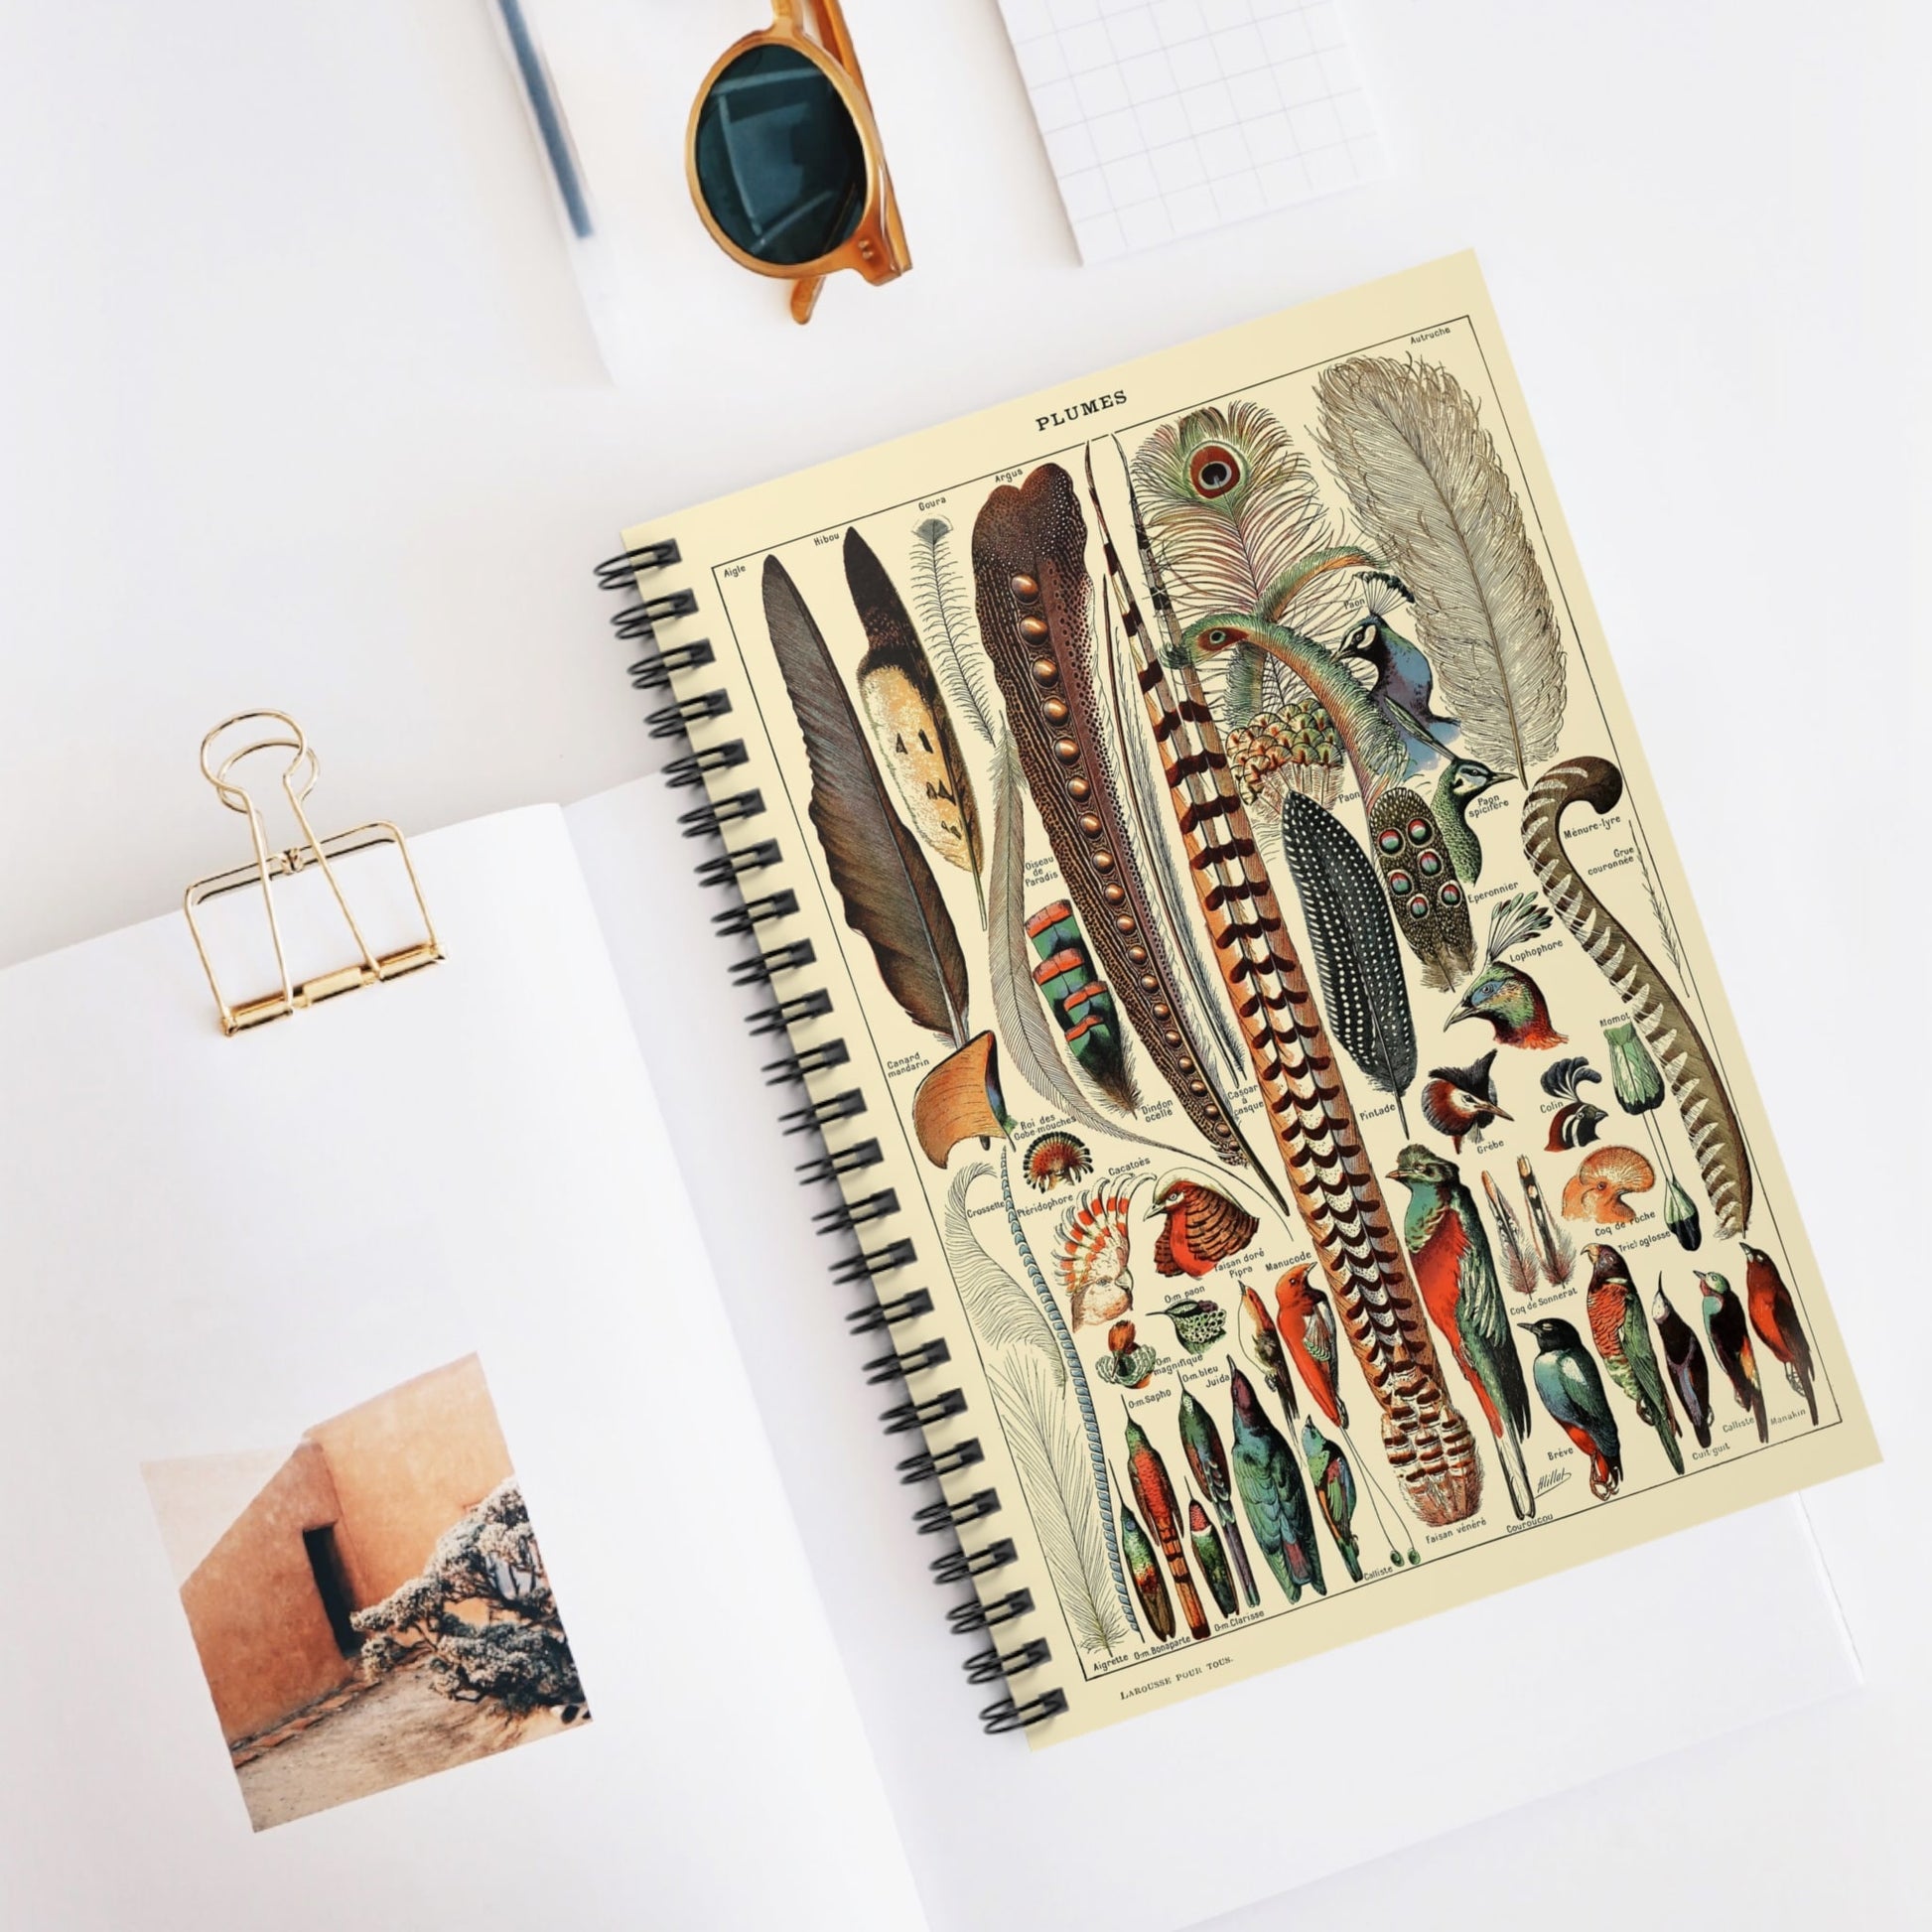 Feathers Spiral Notebook Displayed on Desk